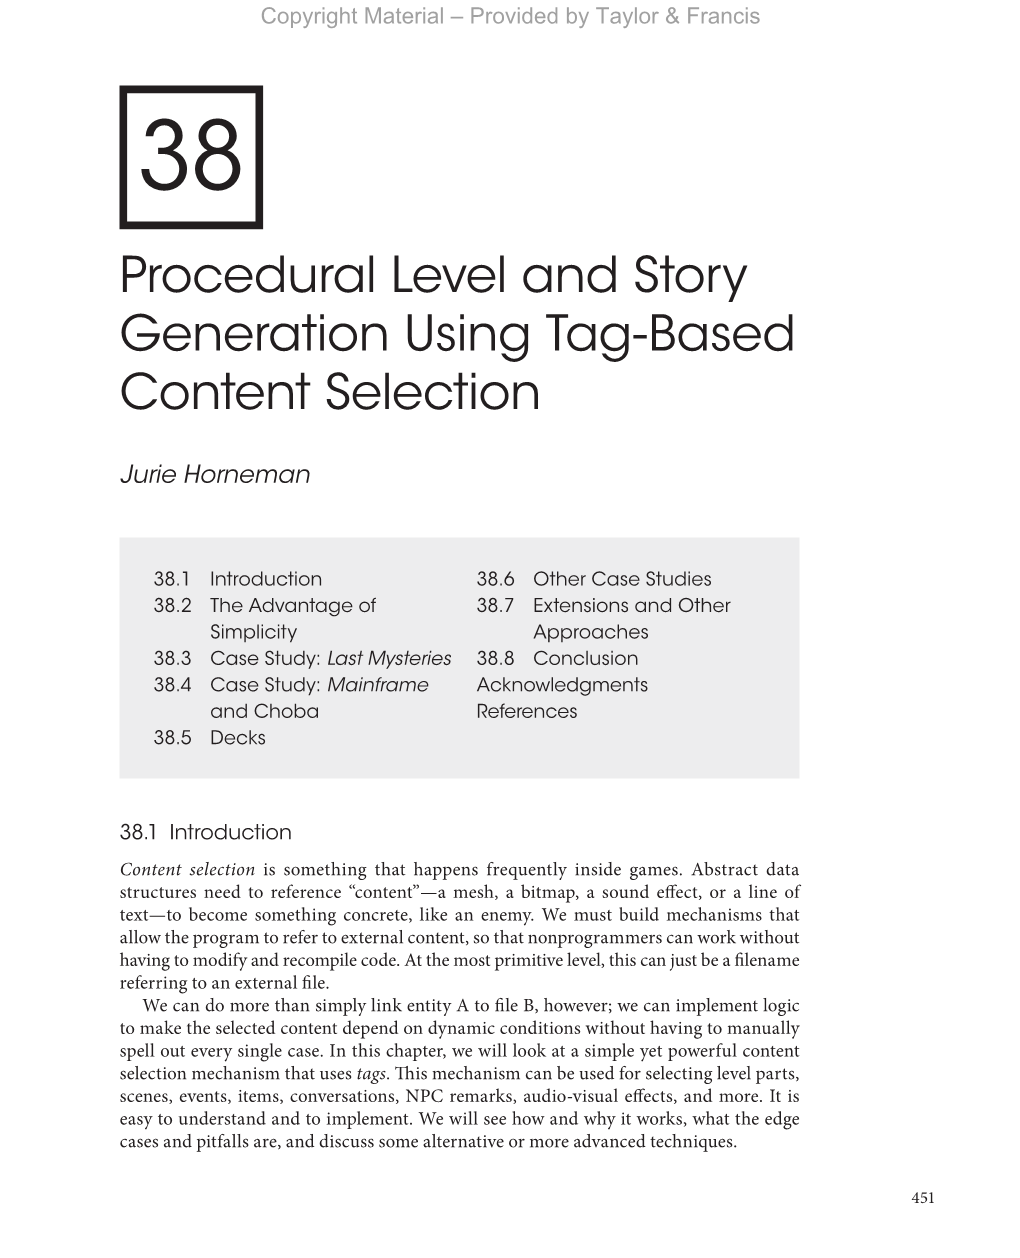 Procedural Level and Story Generation Using Tag-Based Content Selection